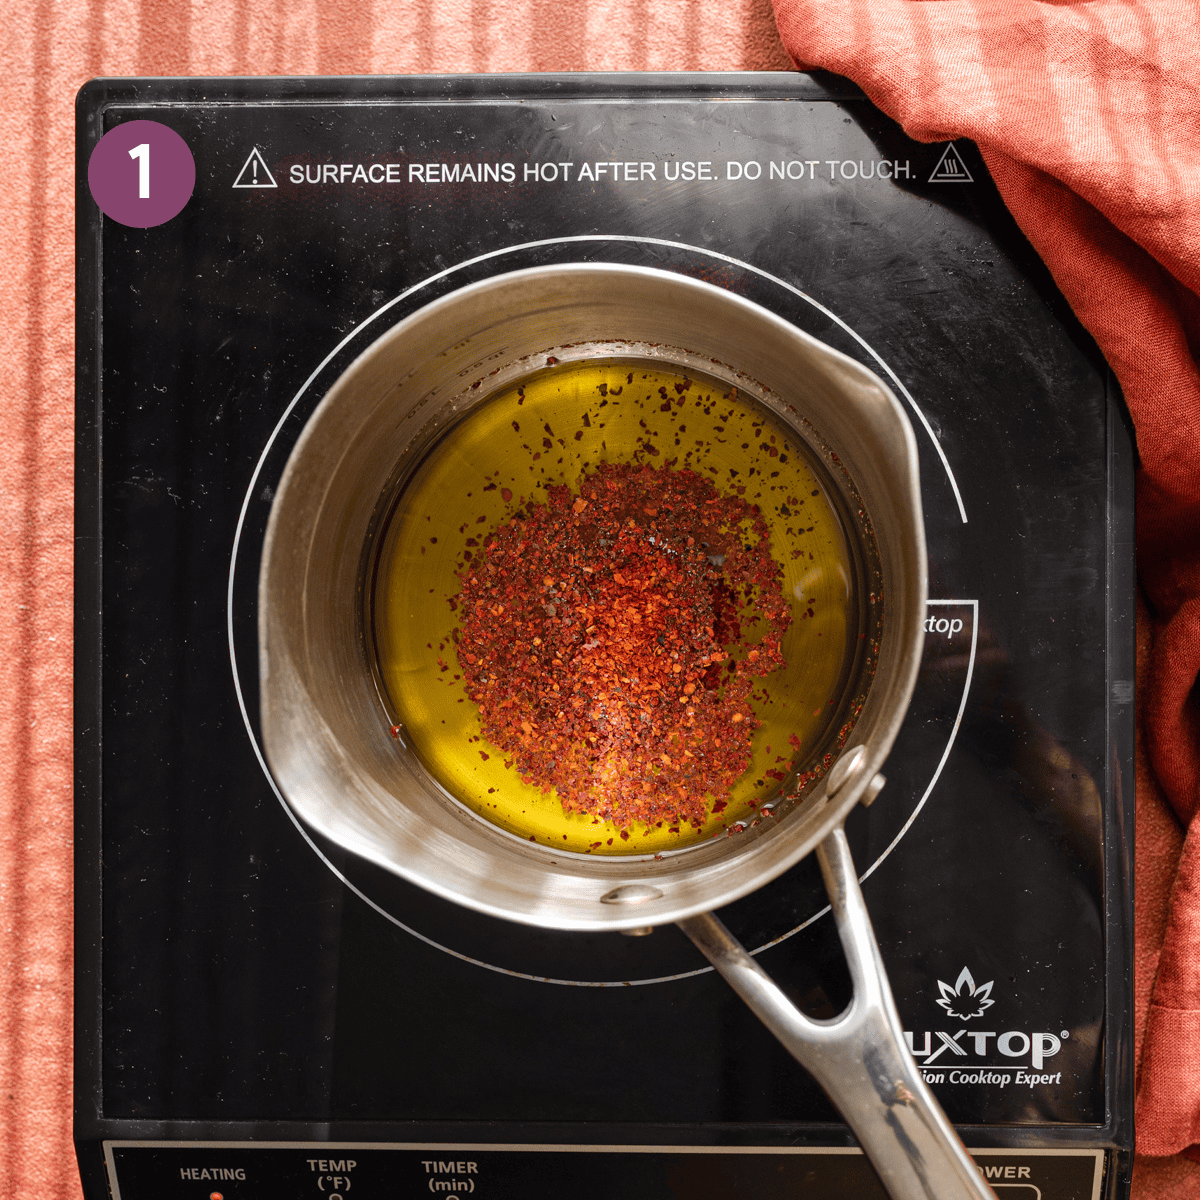 red chili flakes and olive oil in a stainless steel saucepan on a cooktop.